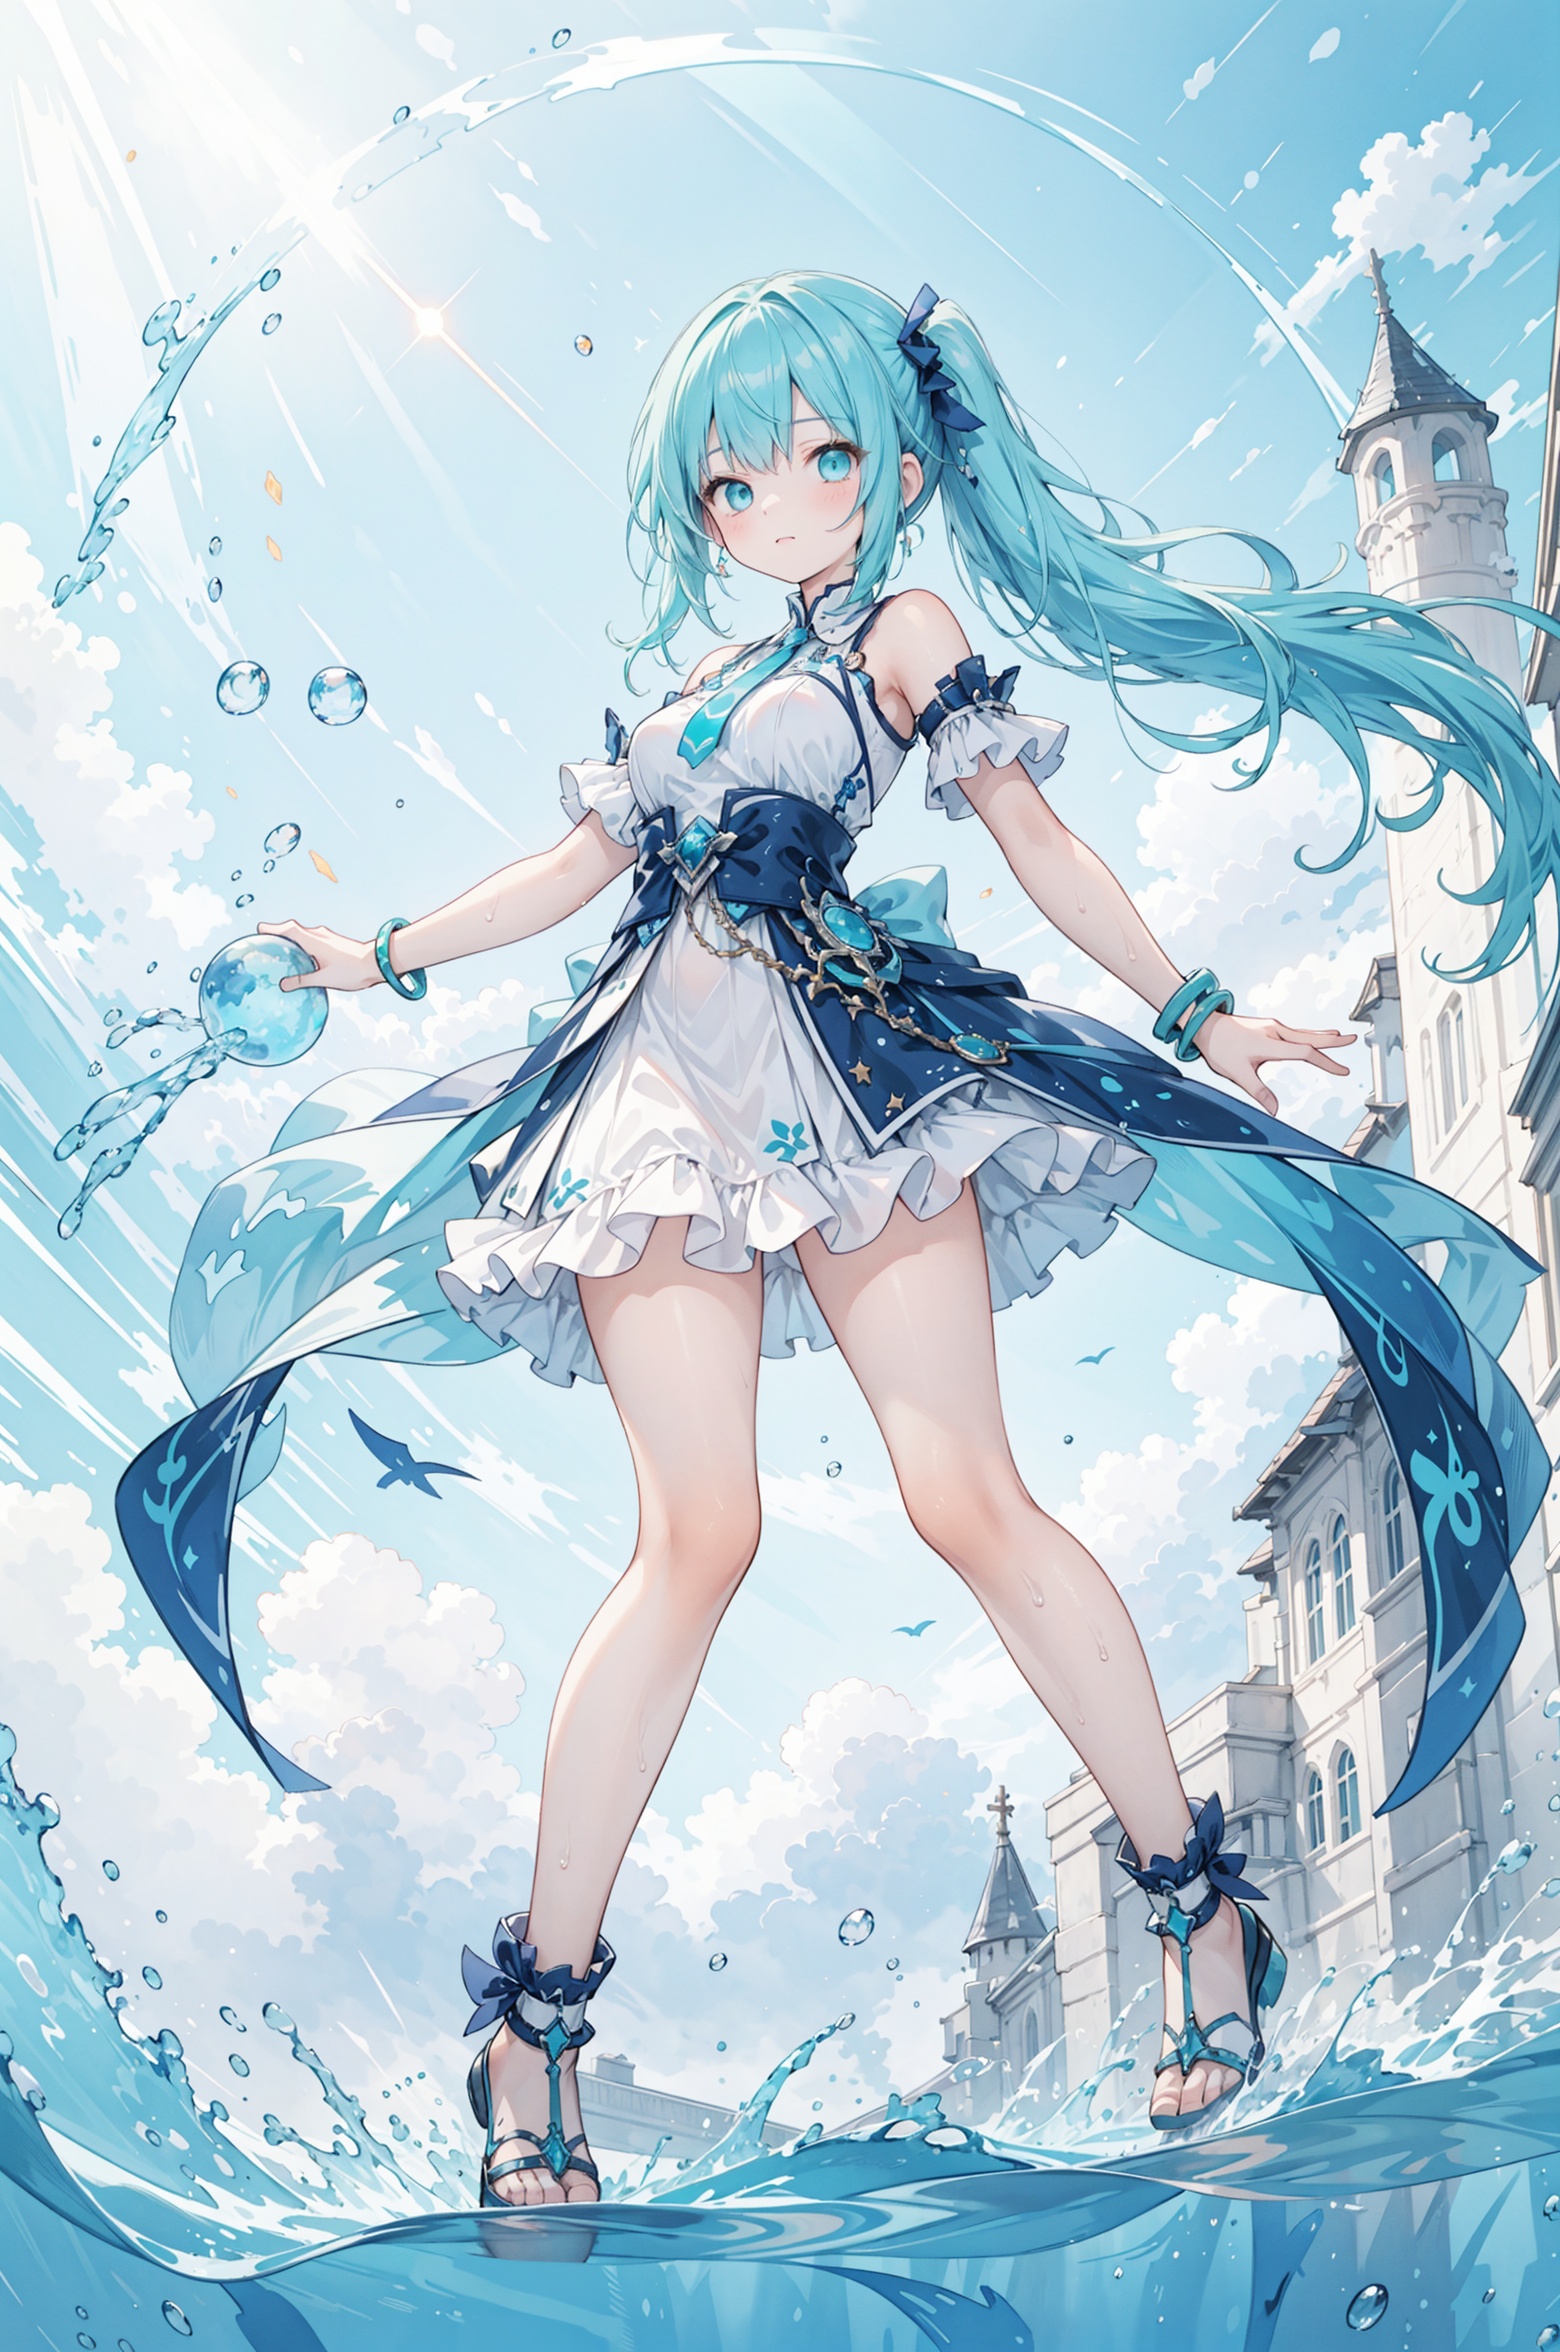 best quality，(masterpiece:1.3),full body,ultra-detailed,solo,1girl, battle_aura, helical_visible_aura full of background,cool and powerful pose,Capital of Water, bracelet made of water around hands,Magic Circle，aqua_aura,floating hair,floating water droplets surronding,dynamic pose, dynamic angle